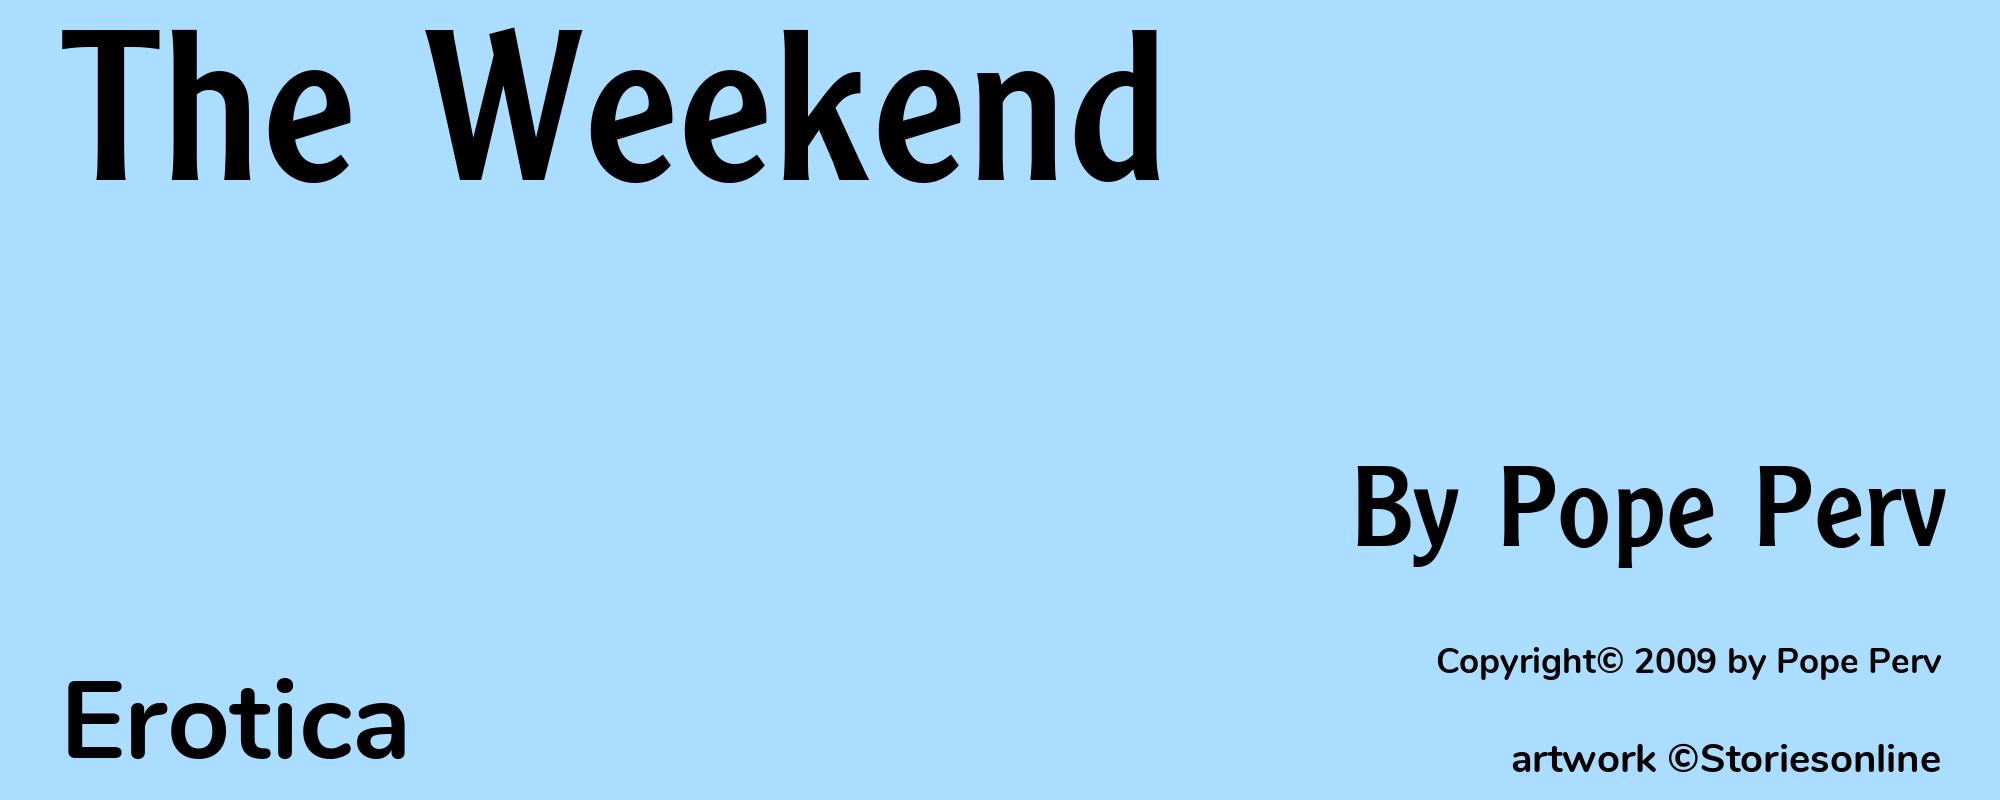 The Weekend - Cover